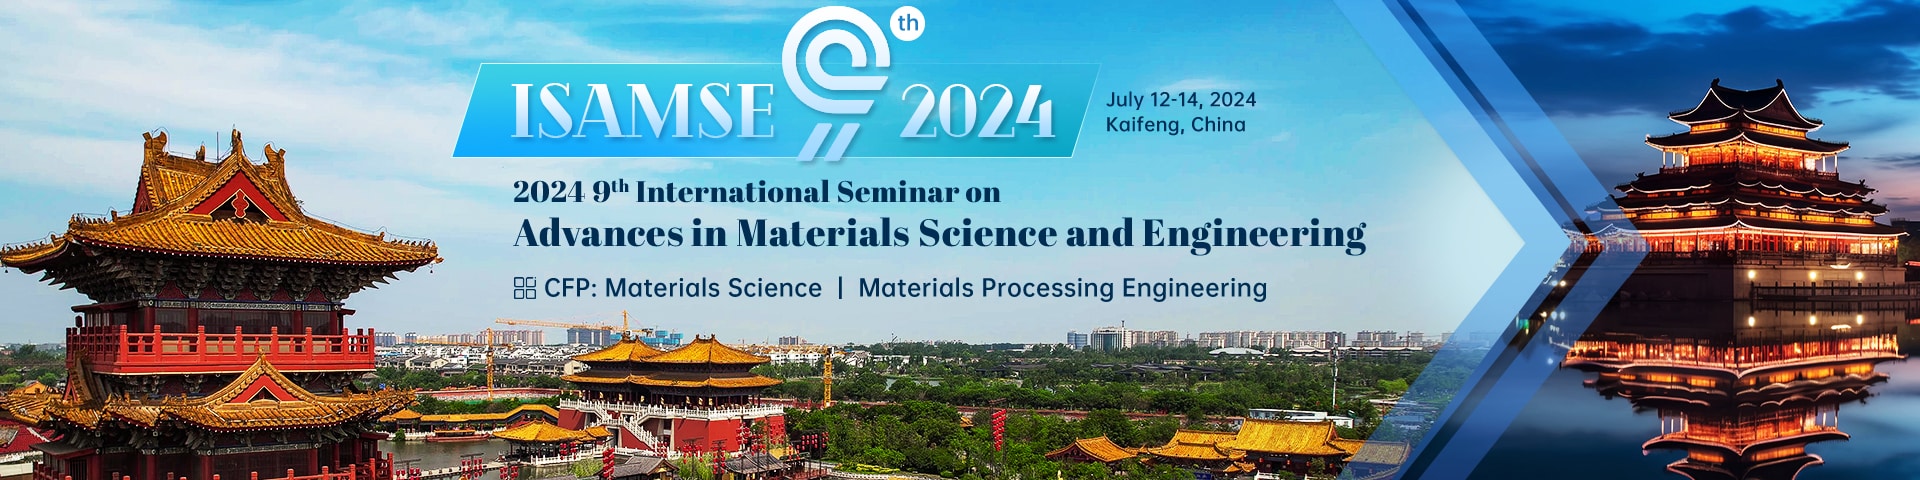 2024 9th International Seminar on Advances in Materials Science and Engineering (ISAMSE 2024)